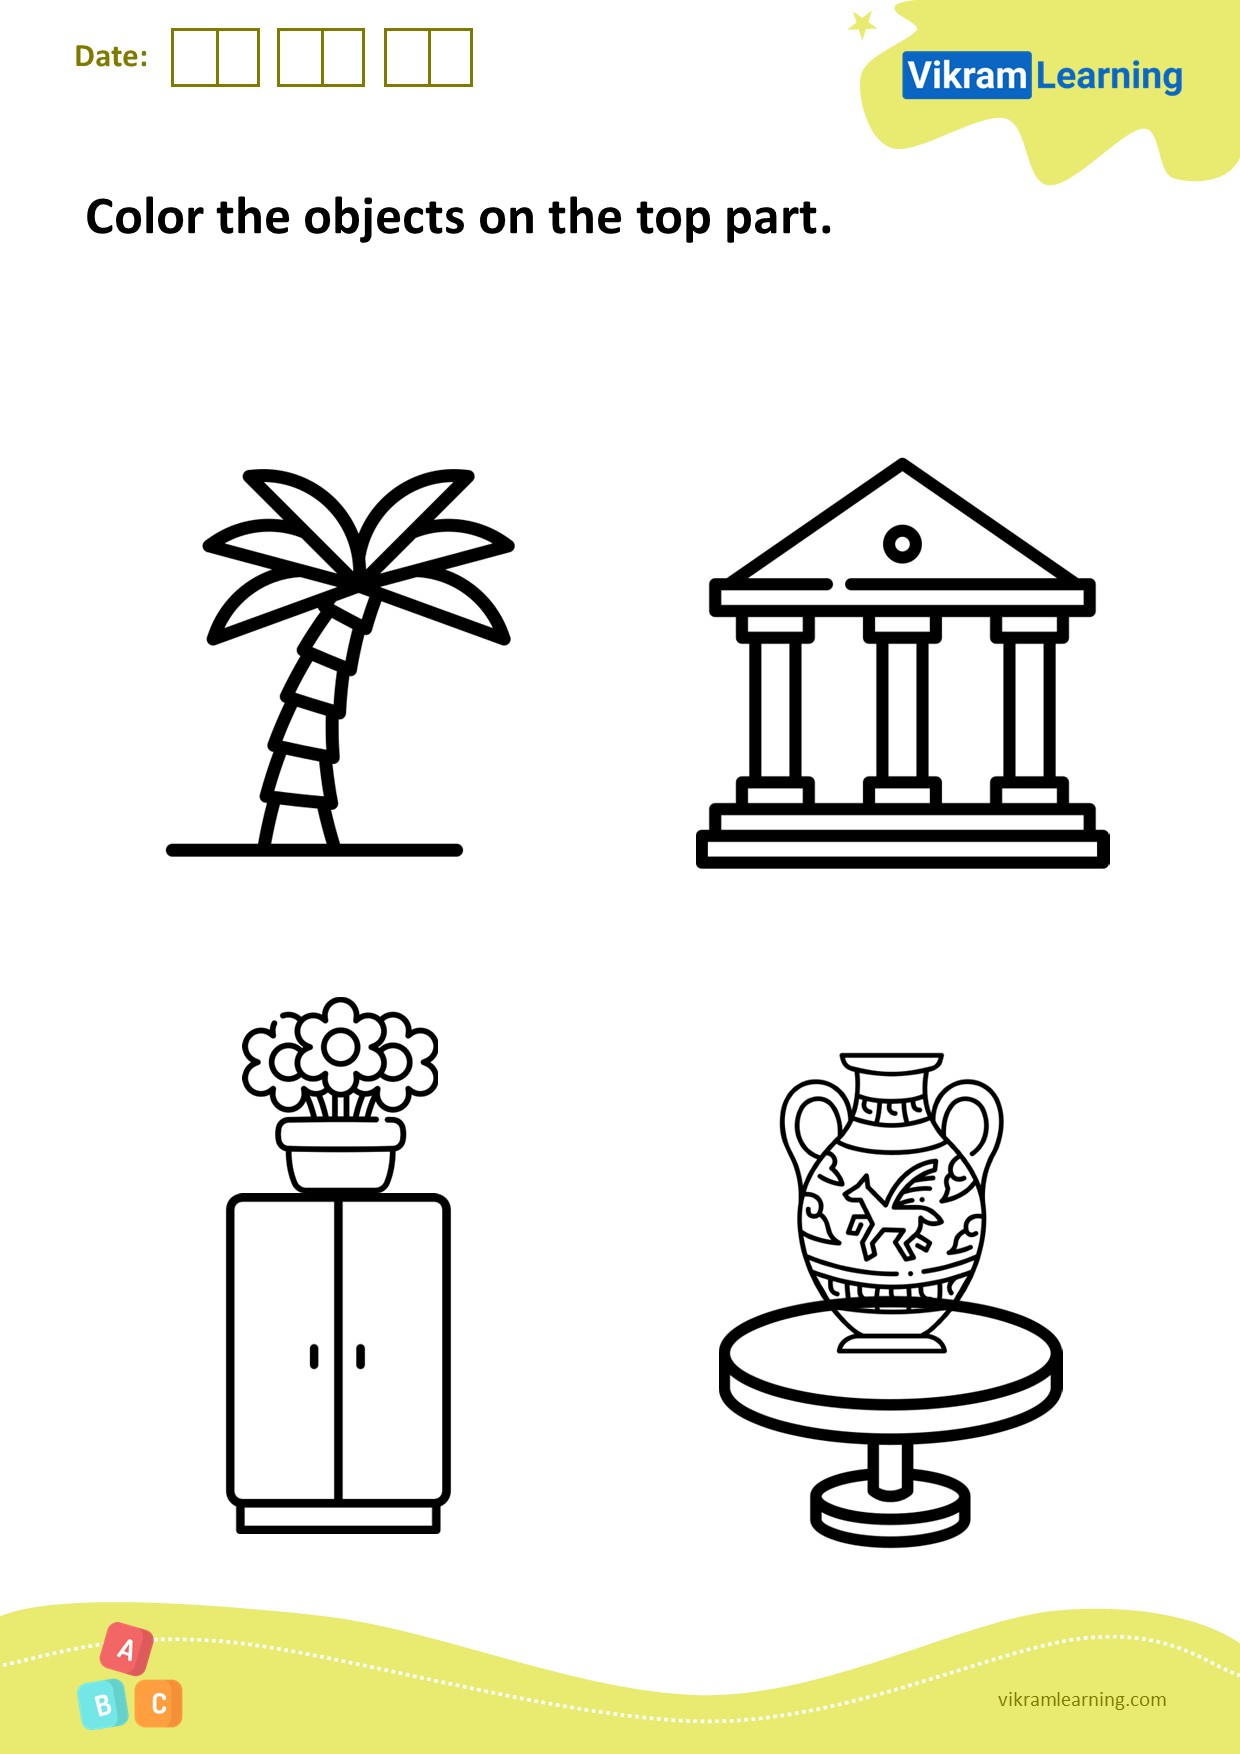 Download color the objects on the top part worksheets